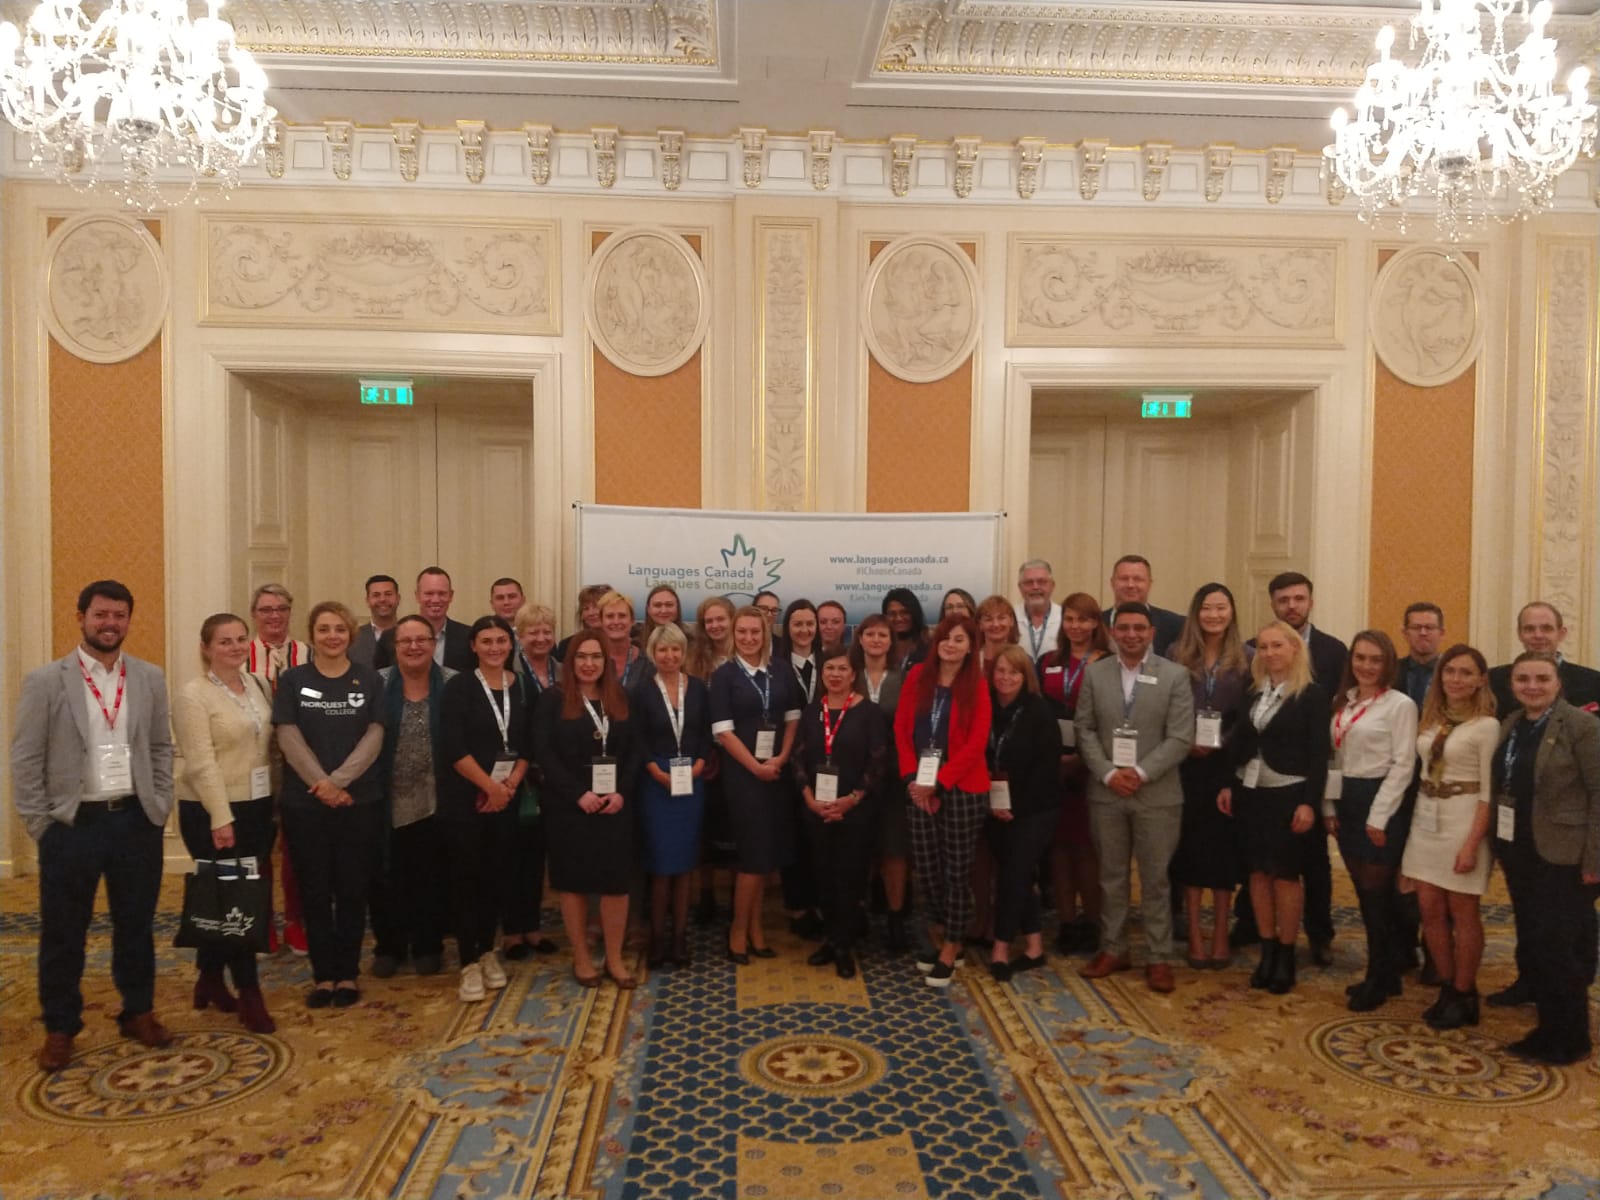 Languages Canada completes successful trade mission to Russia and Ukraine